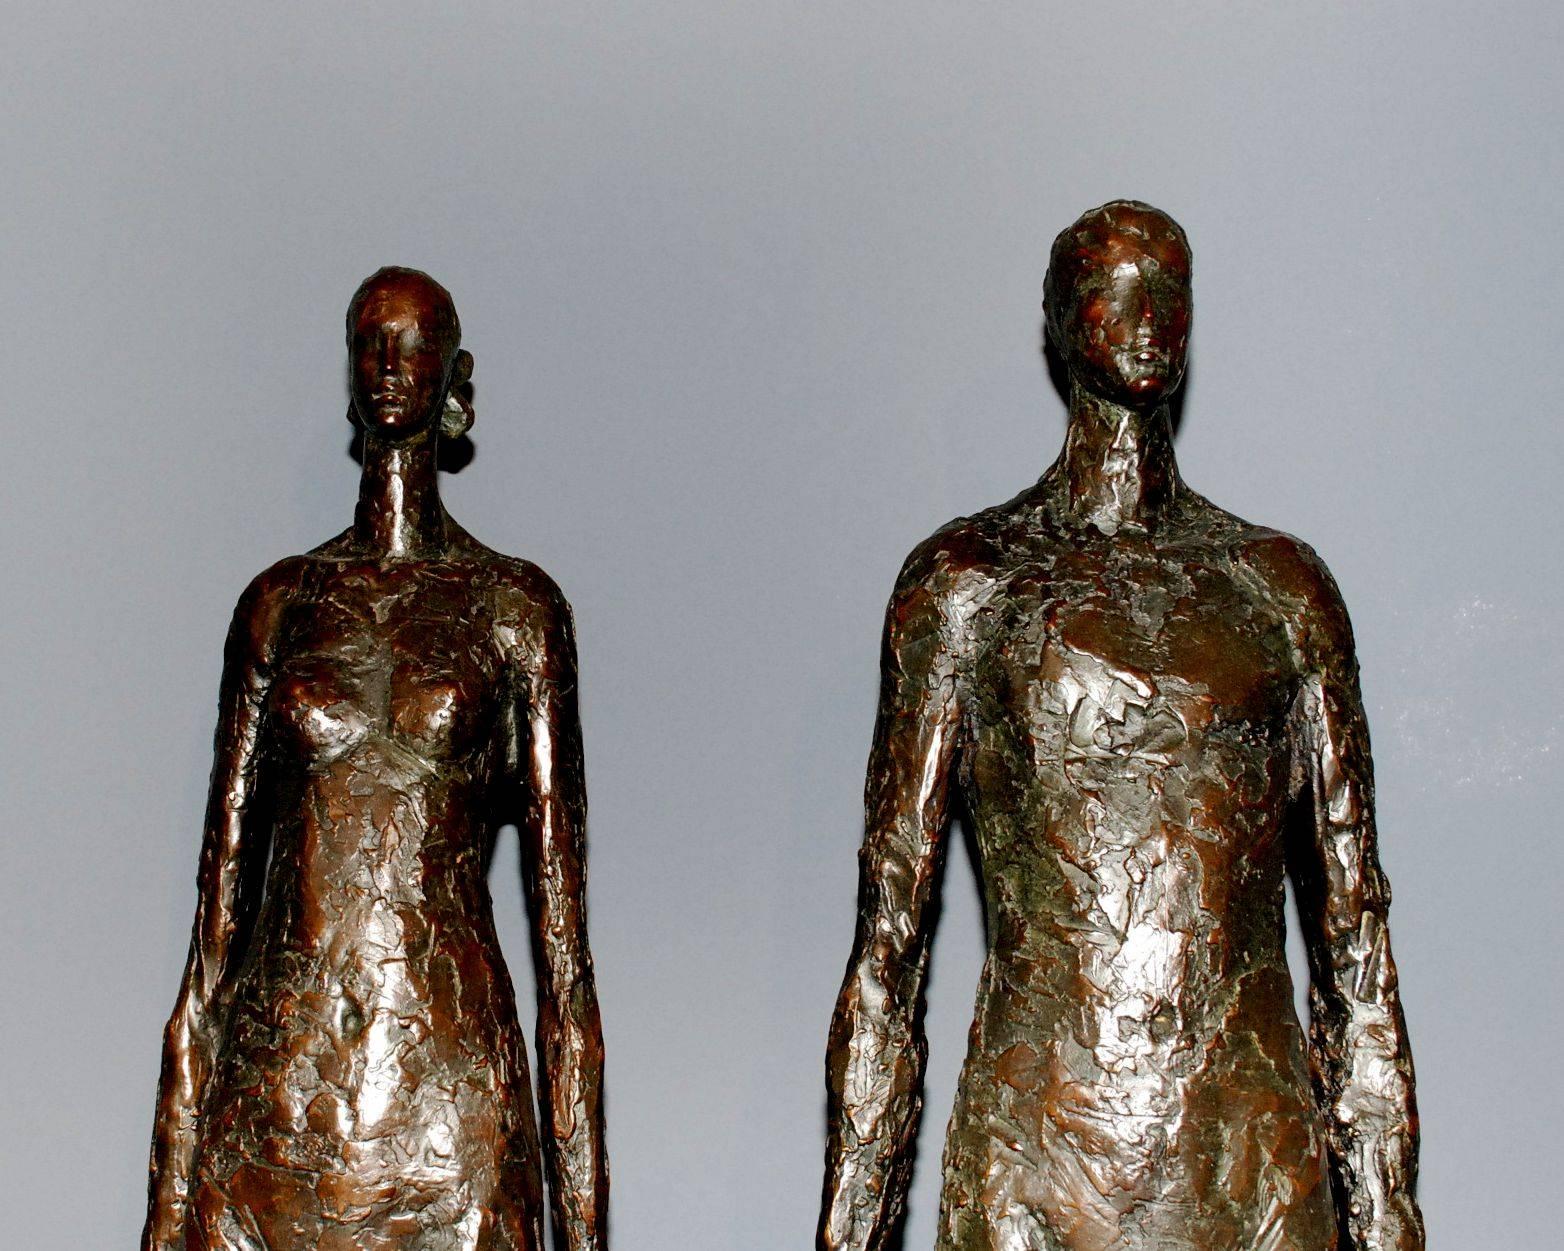 Beautiful tall bronze sculptures of man and woman on plaster base by Tom Corbin.
Edition 50.
(Bronze, green/brown patina.
Light grey granite base).
Measures: Man 78.25” H, 12” D, 13” W.
Woman 77” H, 12” D, 12” W.
Biography:
Tom Corbin’s